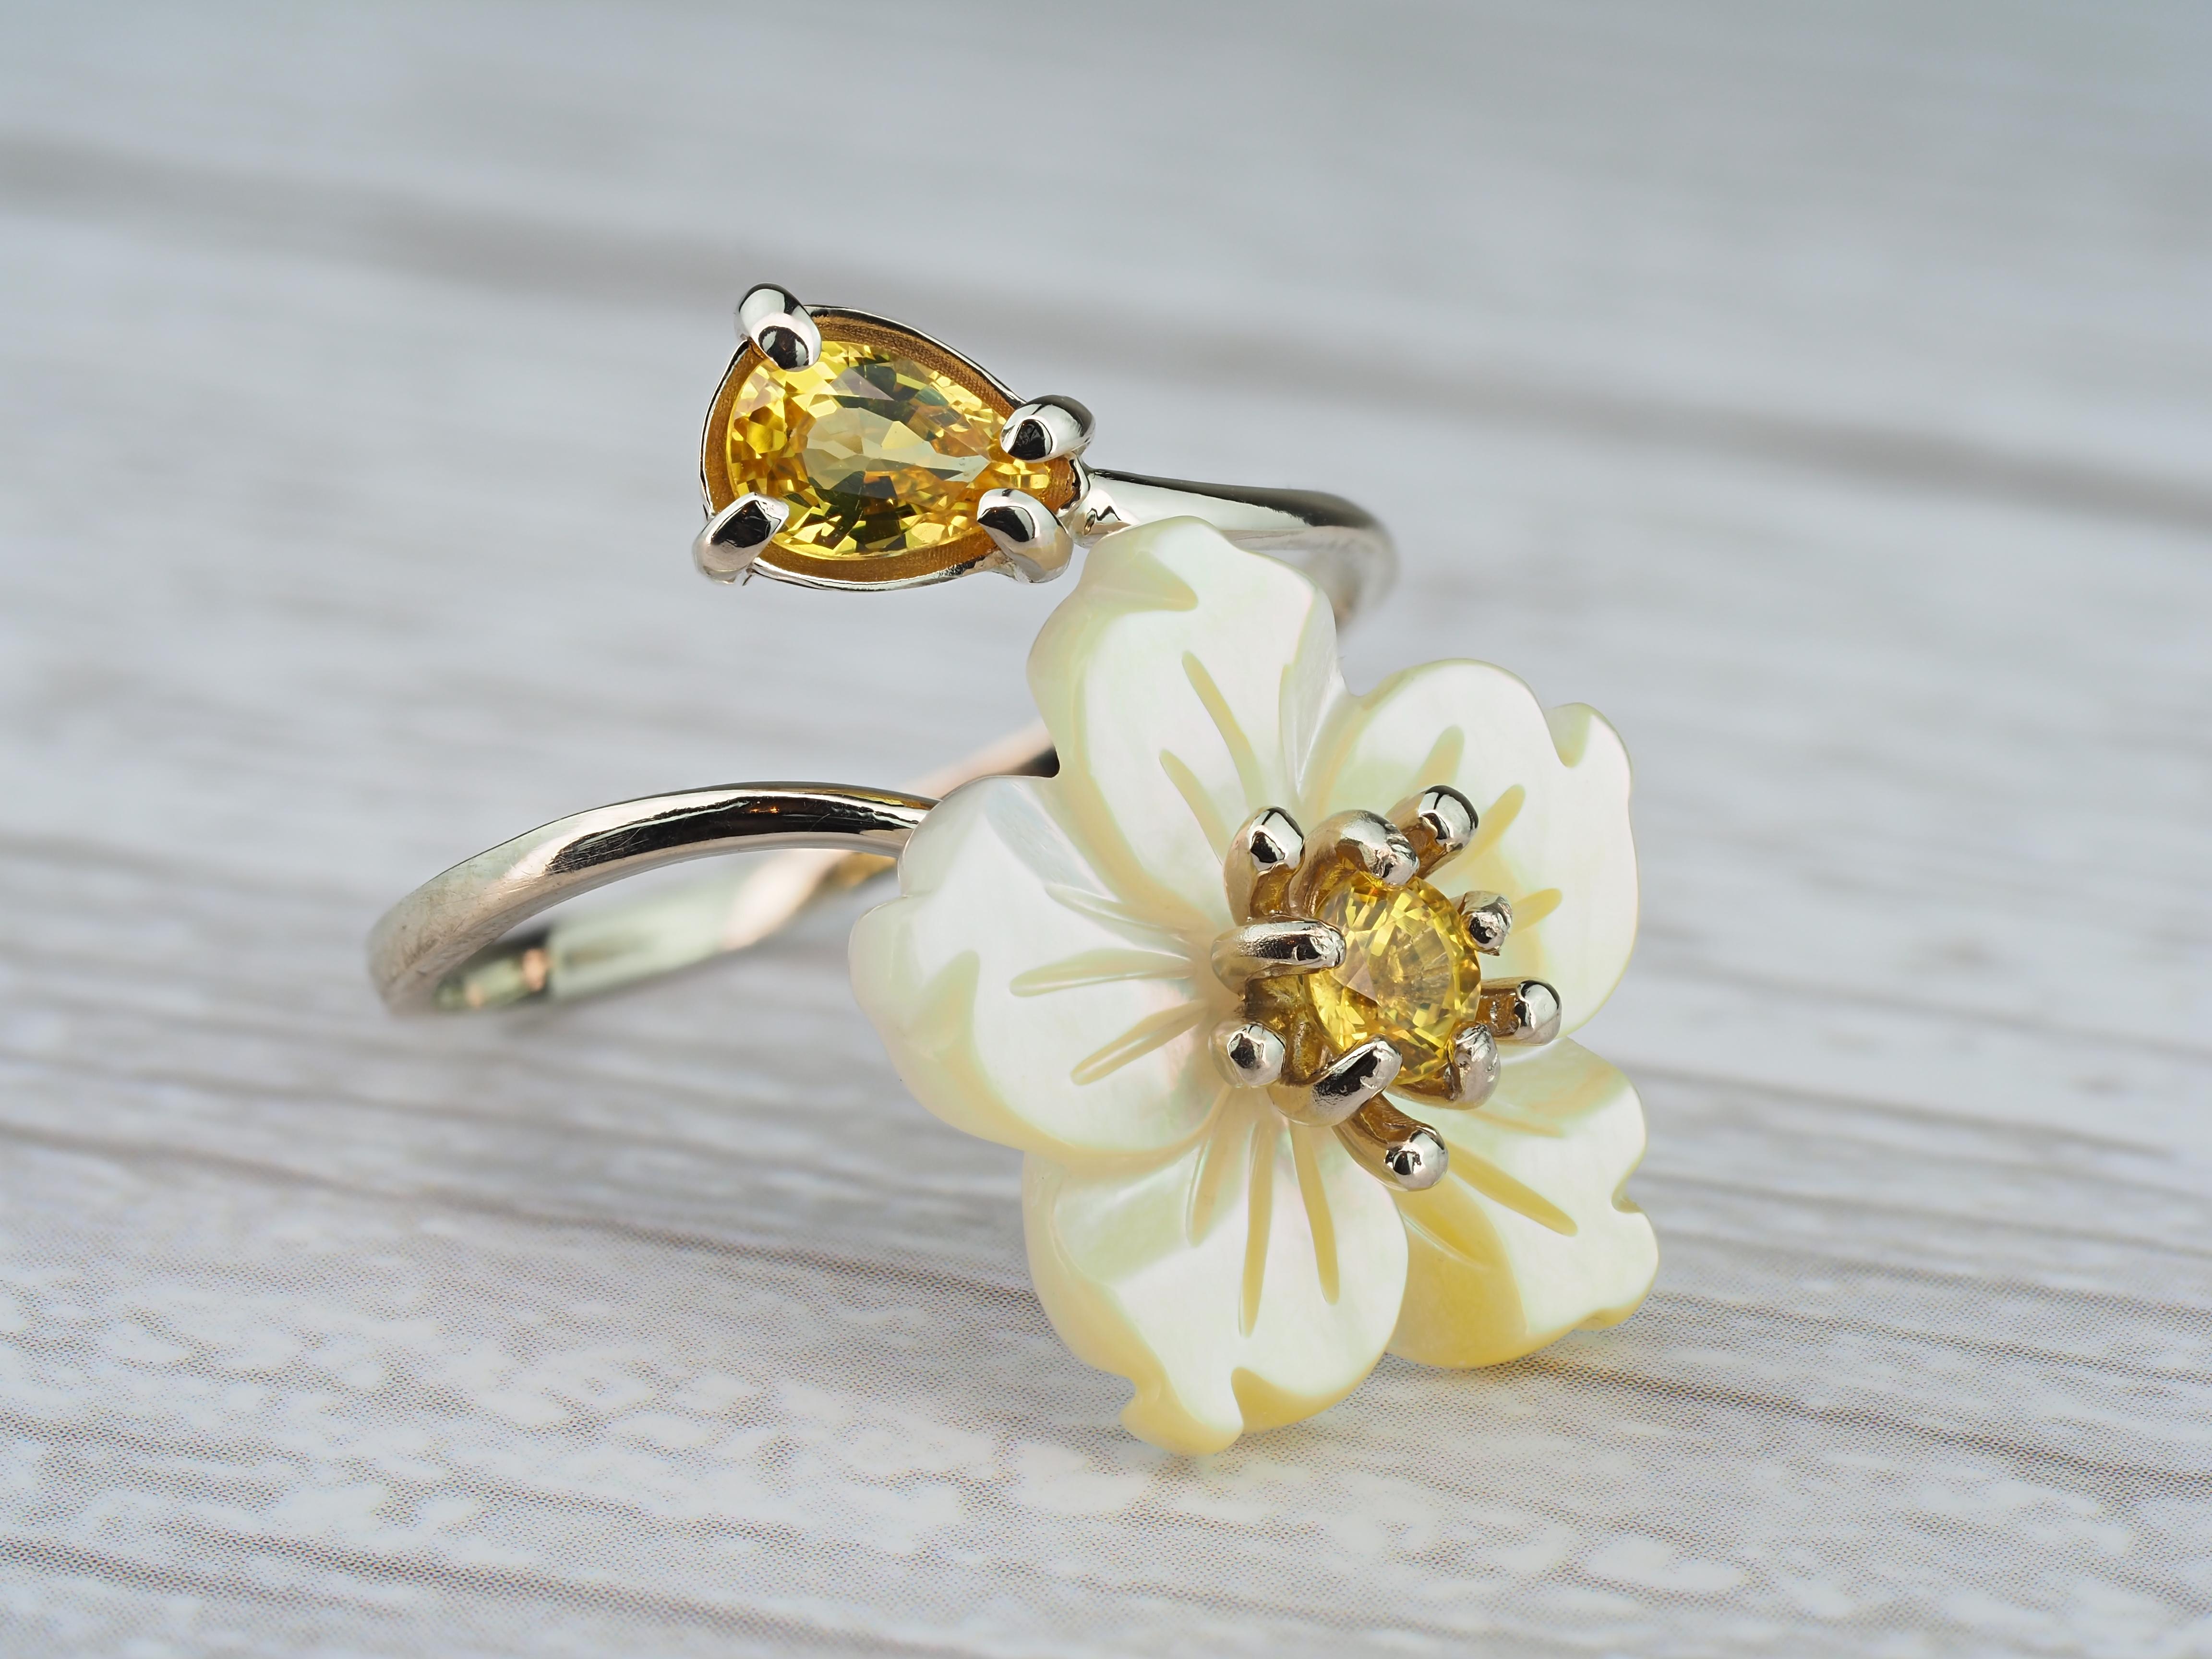 For Sale:  Yellow Sapphire Ring in 14k Gold, Genuine Sapphire Gold Ring 7